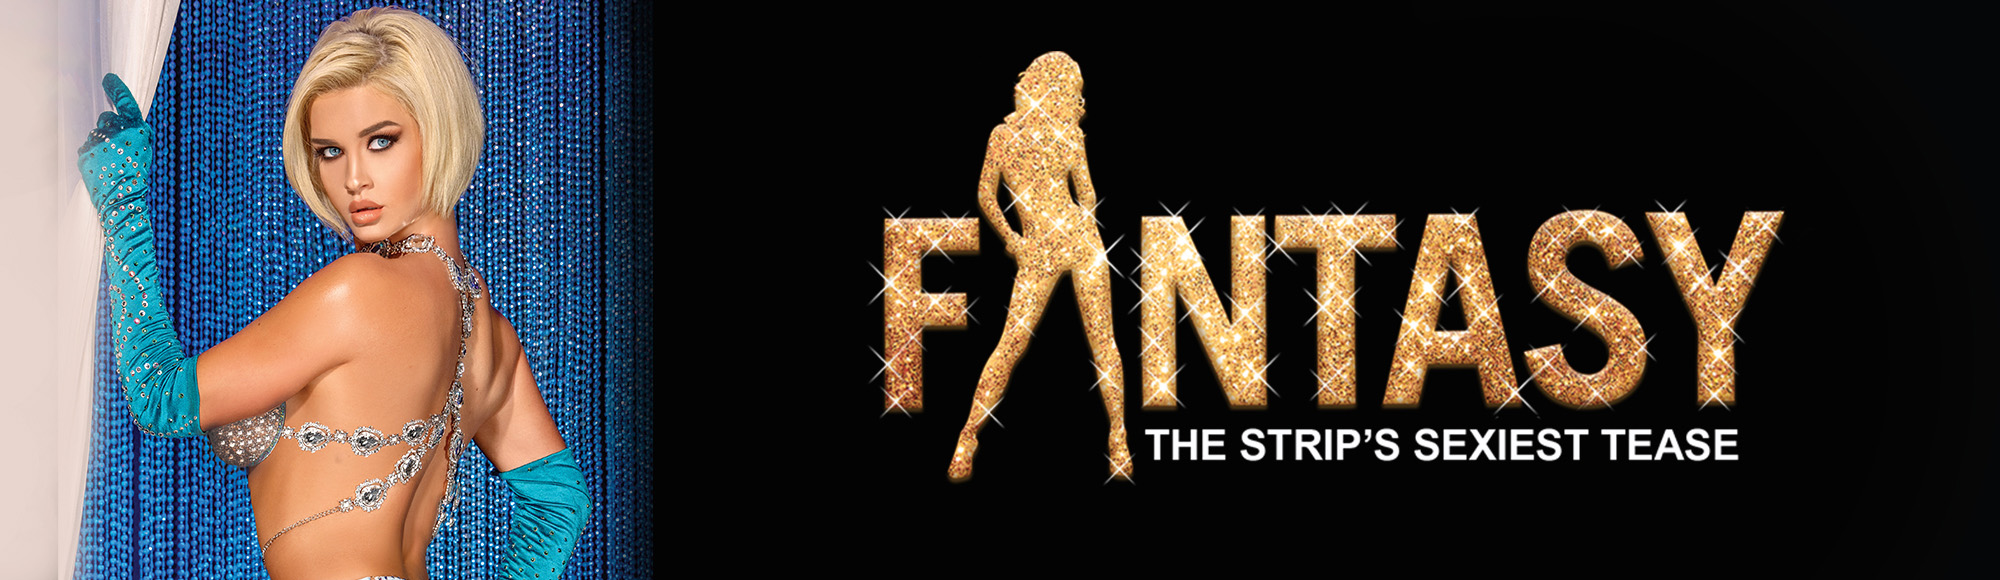 FANTASY: The Strip’s Sexiest Tease show